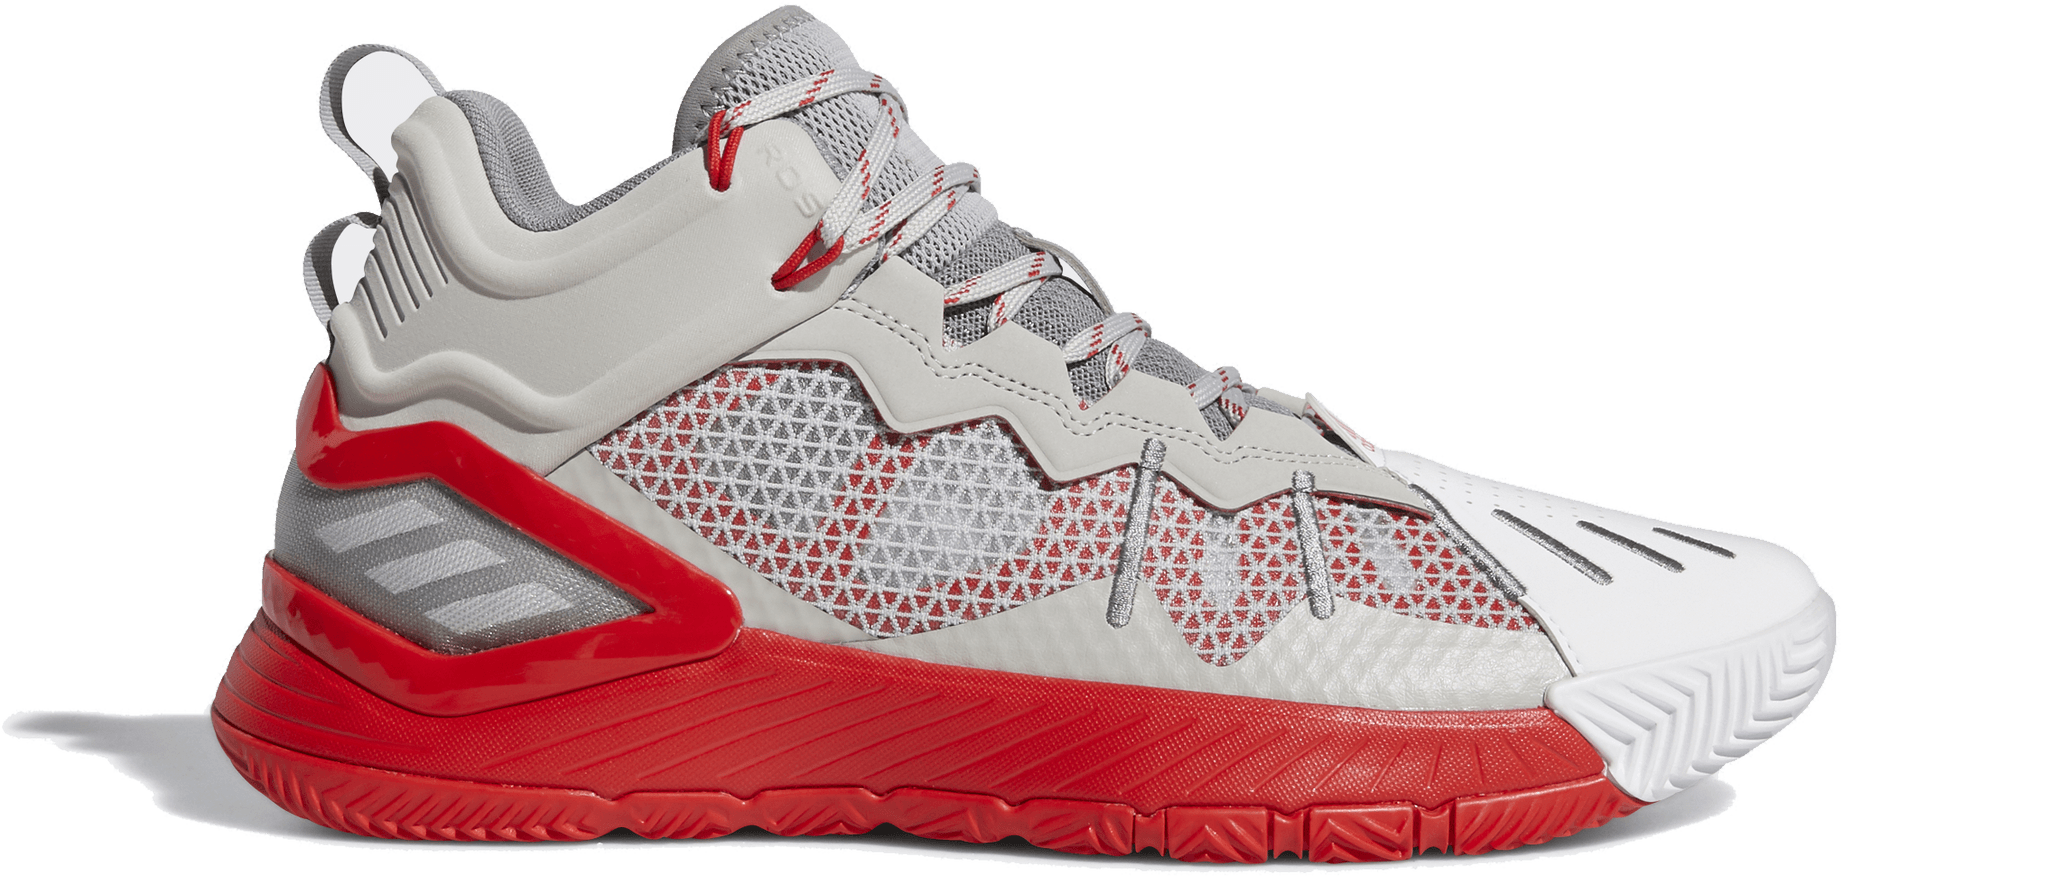 Adidas D Rose Son Of Chi - Review, Deals, Pics of 7 Colorways